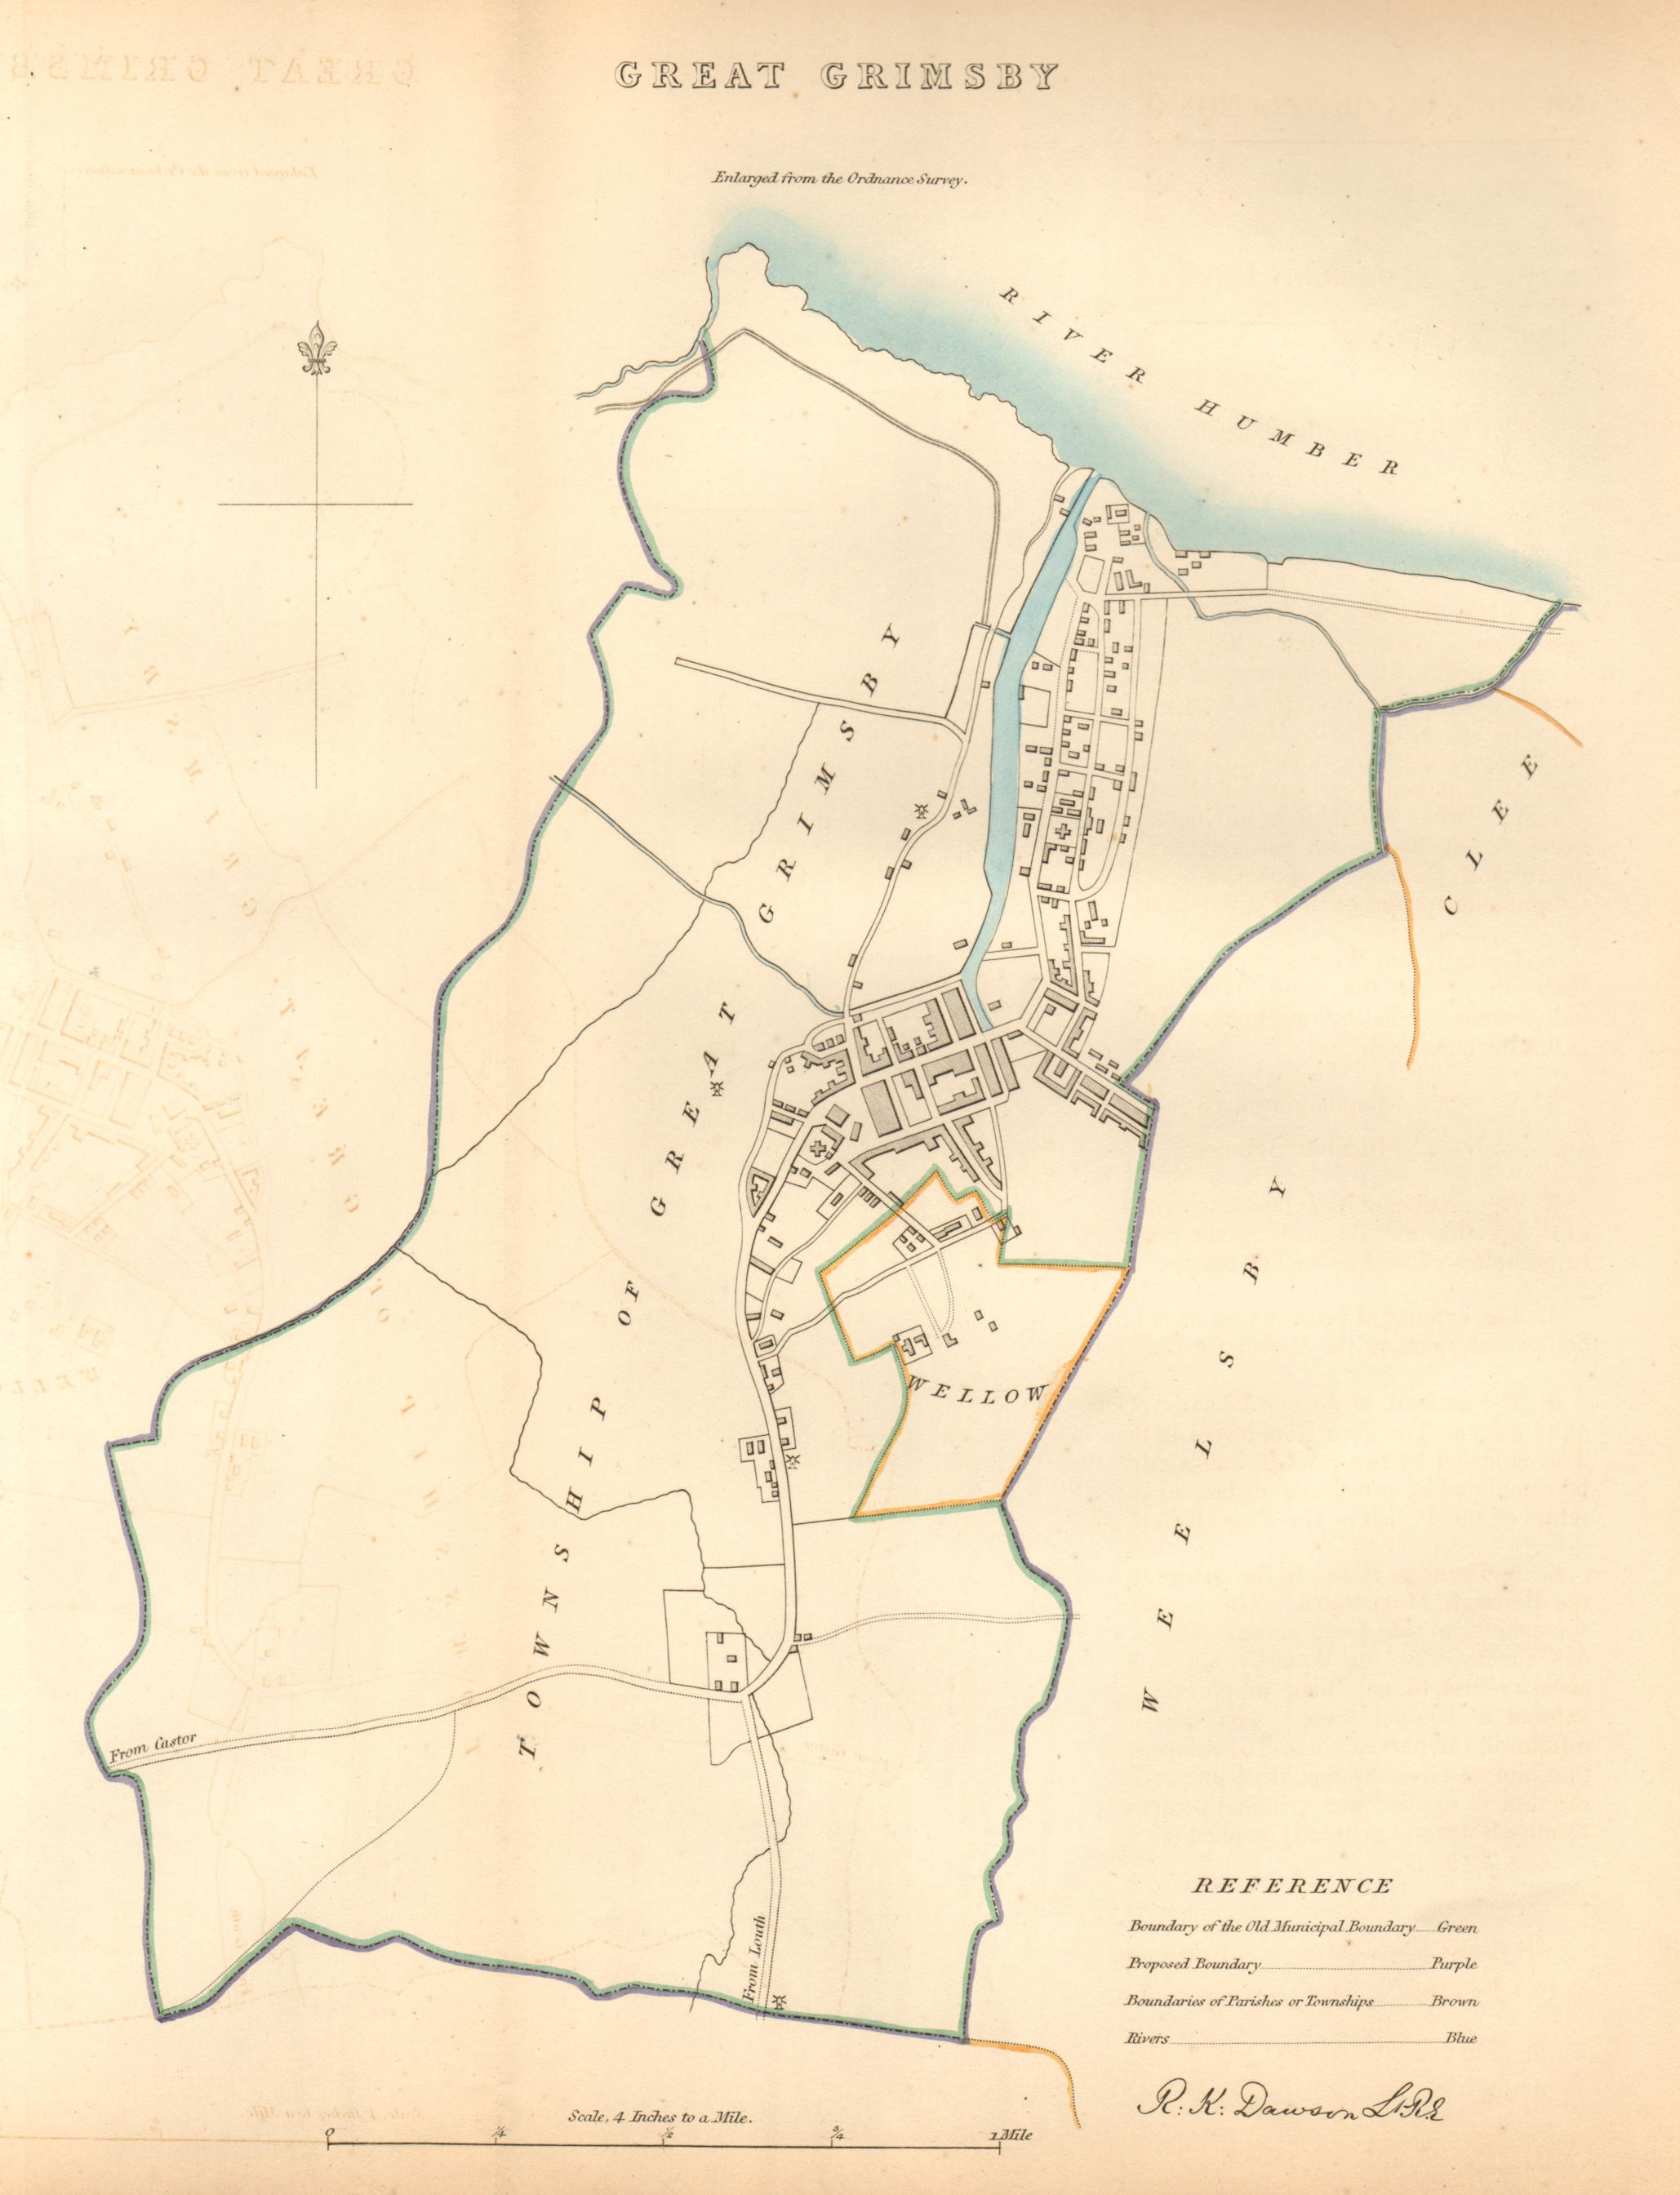 Associate Product GREAT GRIMSBY borough/town/city plan. BOUNDARY COMMISSION Lincs. DAWSON 1837 map